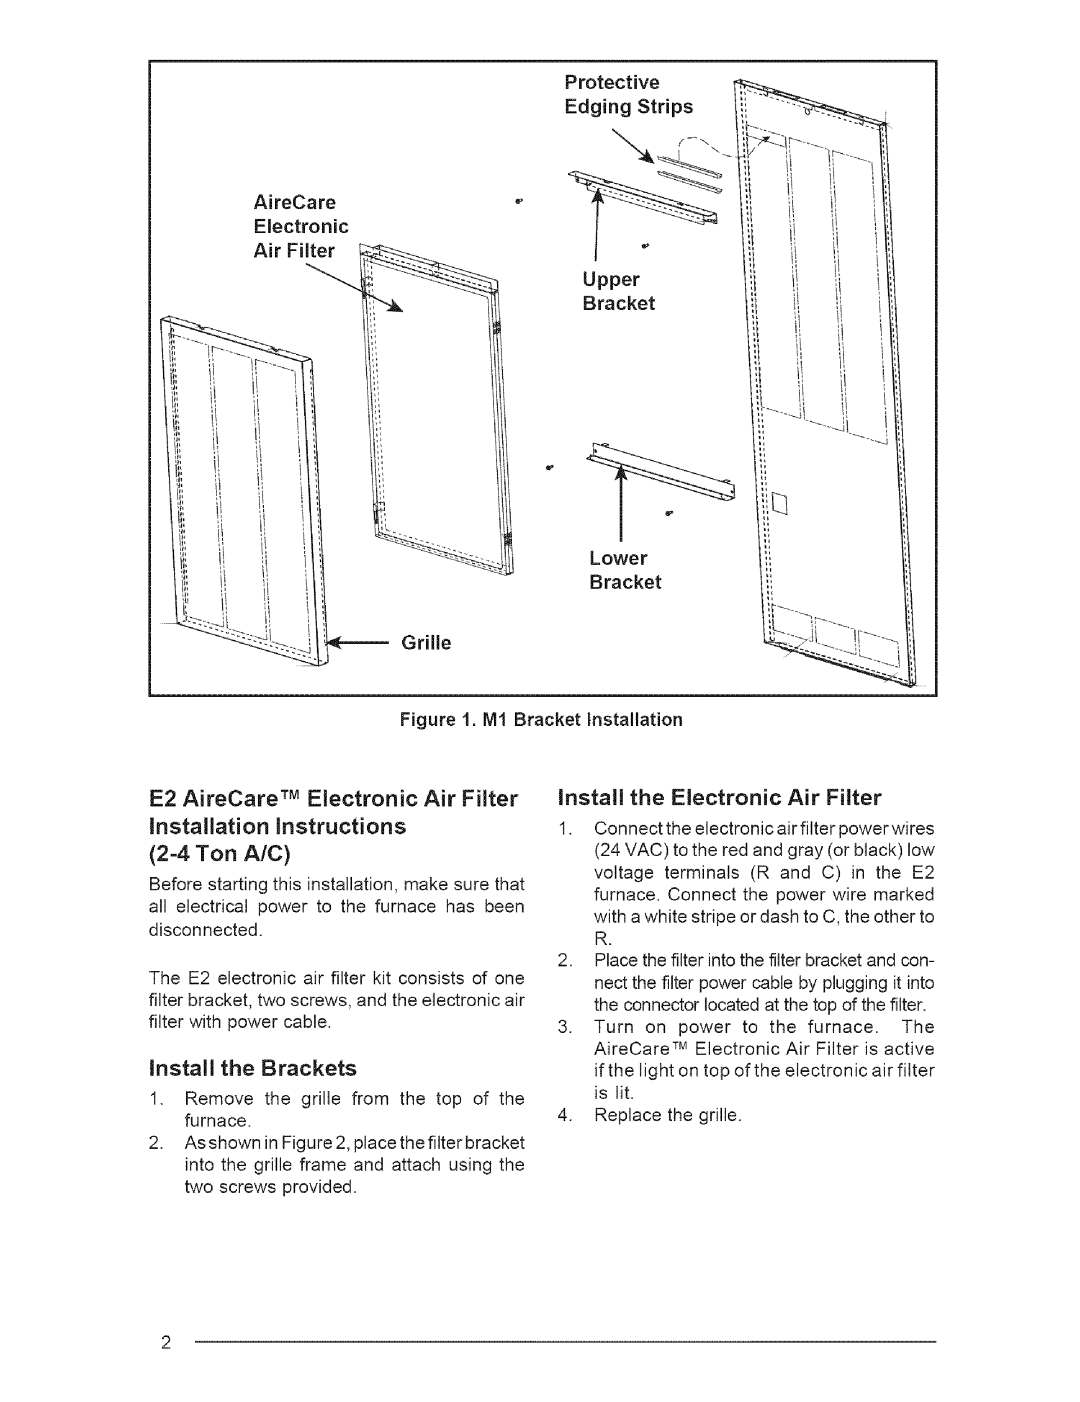 Nordyne 707831C E2 AireCare TM Electronic Air Filter, installation Instructions 2-4 Ton A/C, Install the Brackets, Lower 